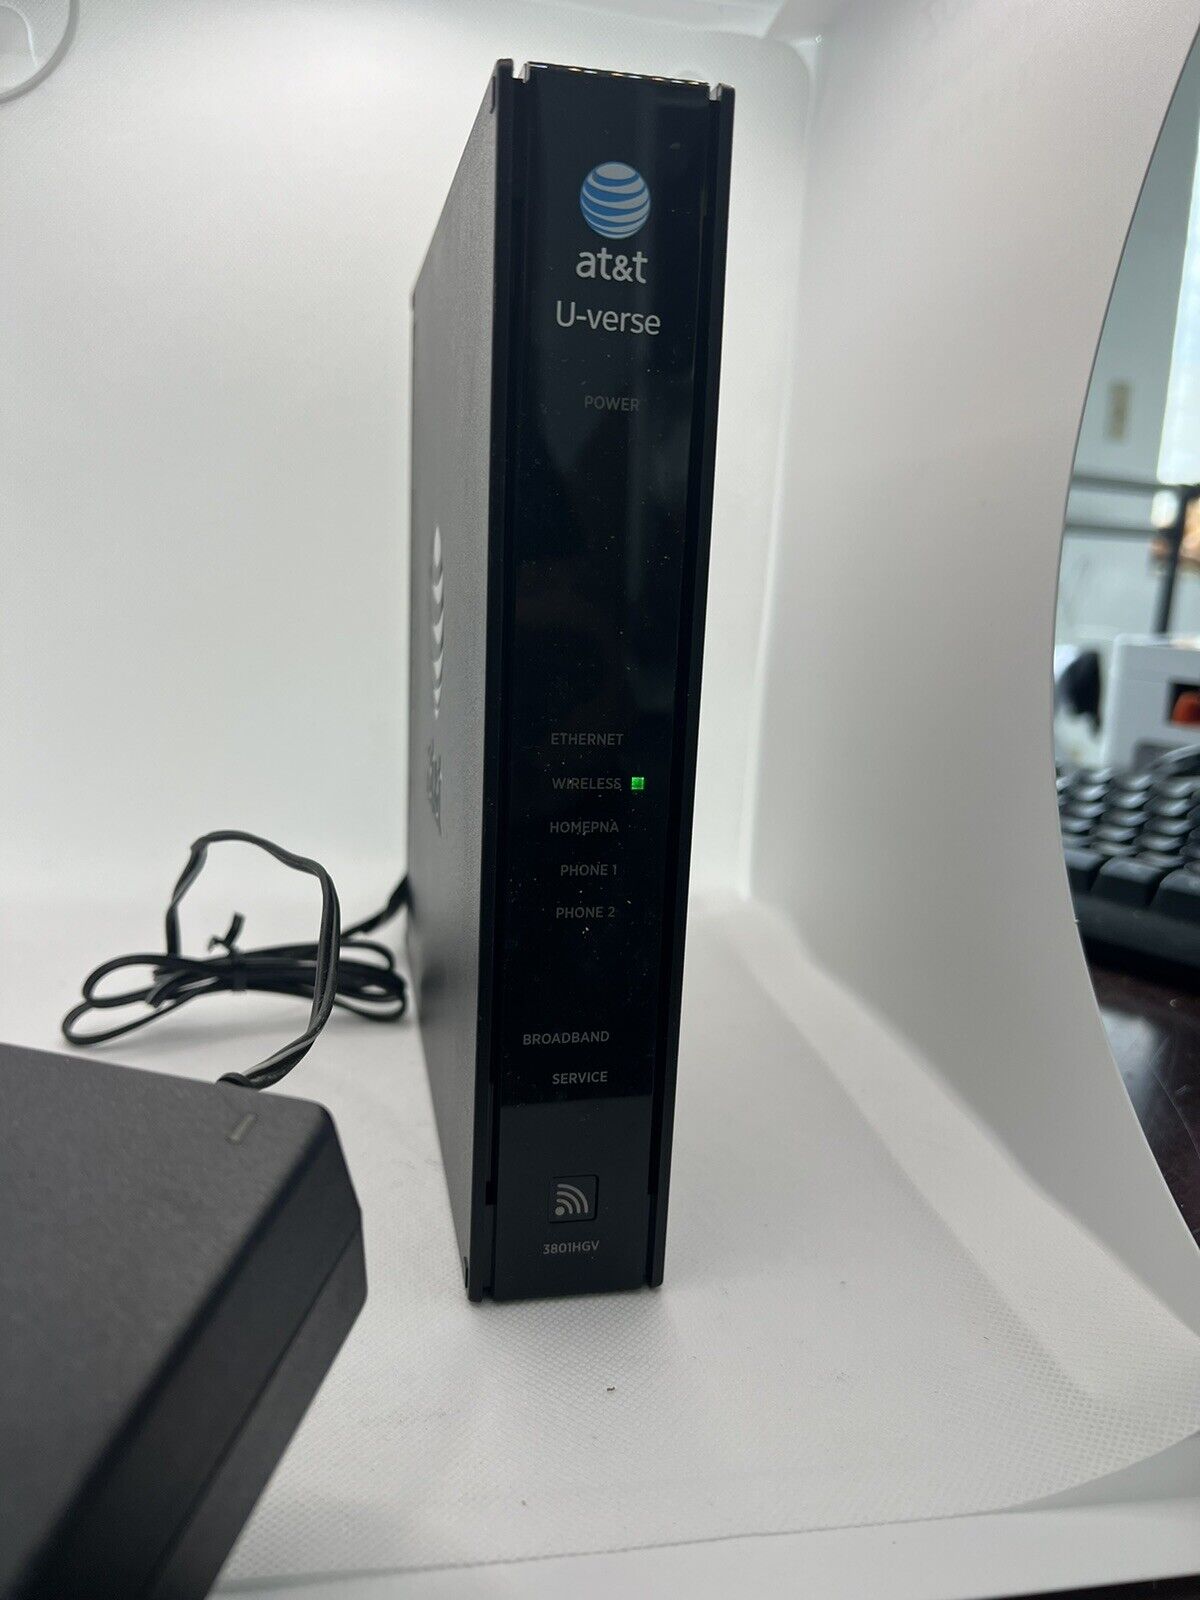 AT&T U-Verse Pace 3801HGV 4 port Wireless Modem Router 